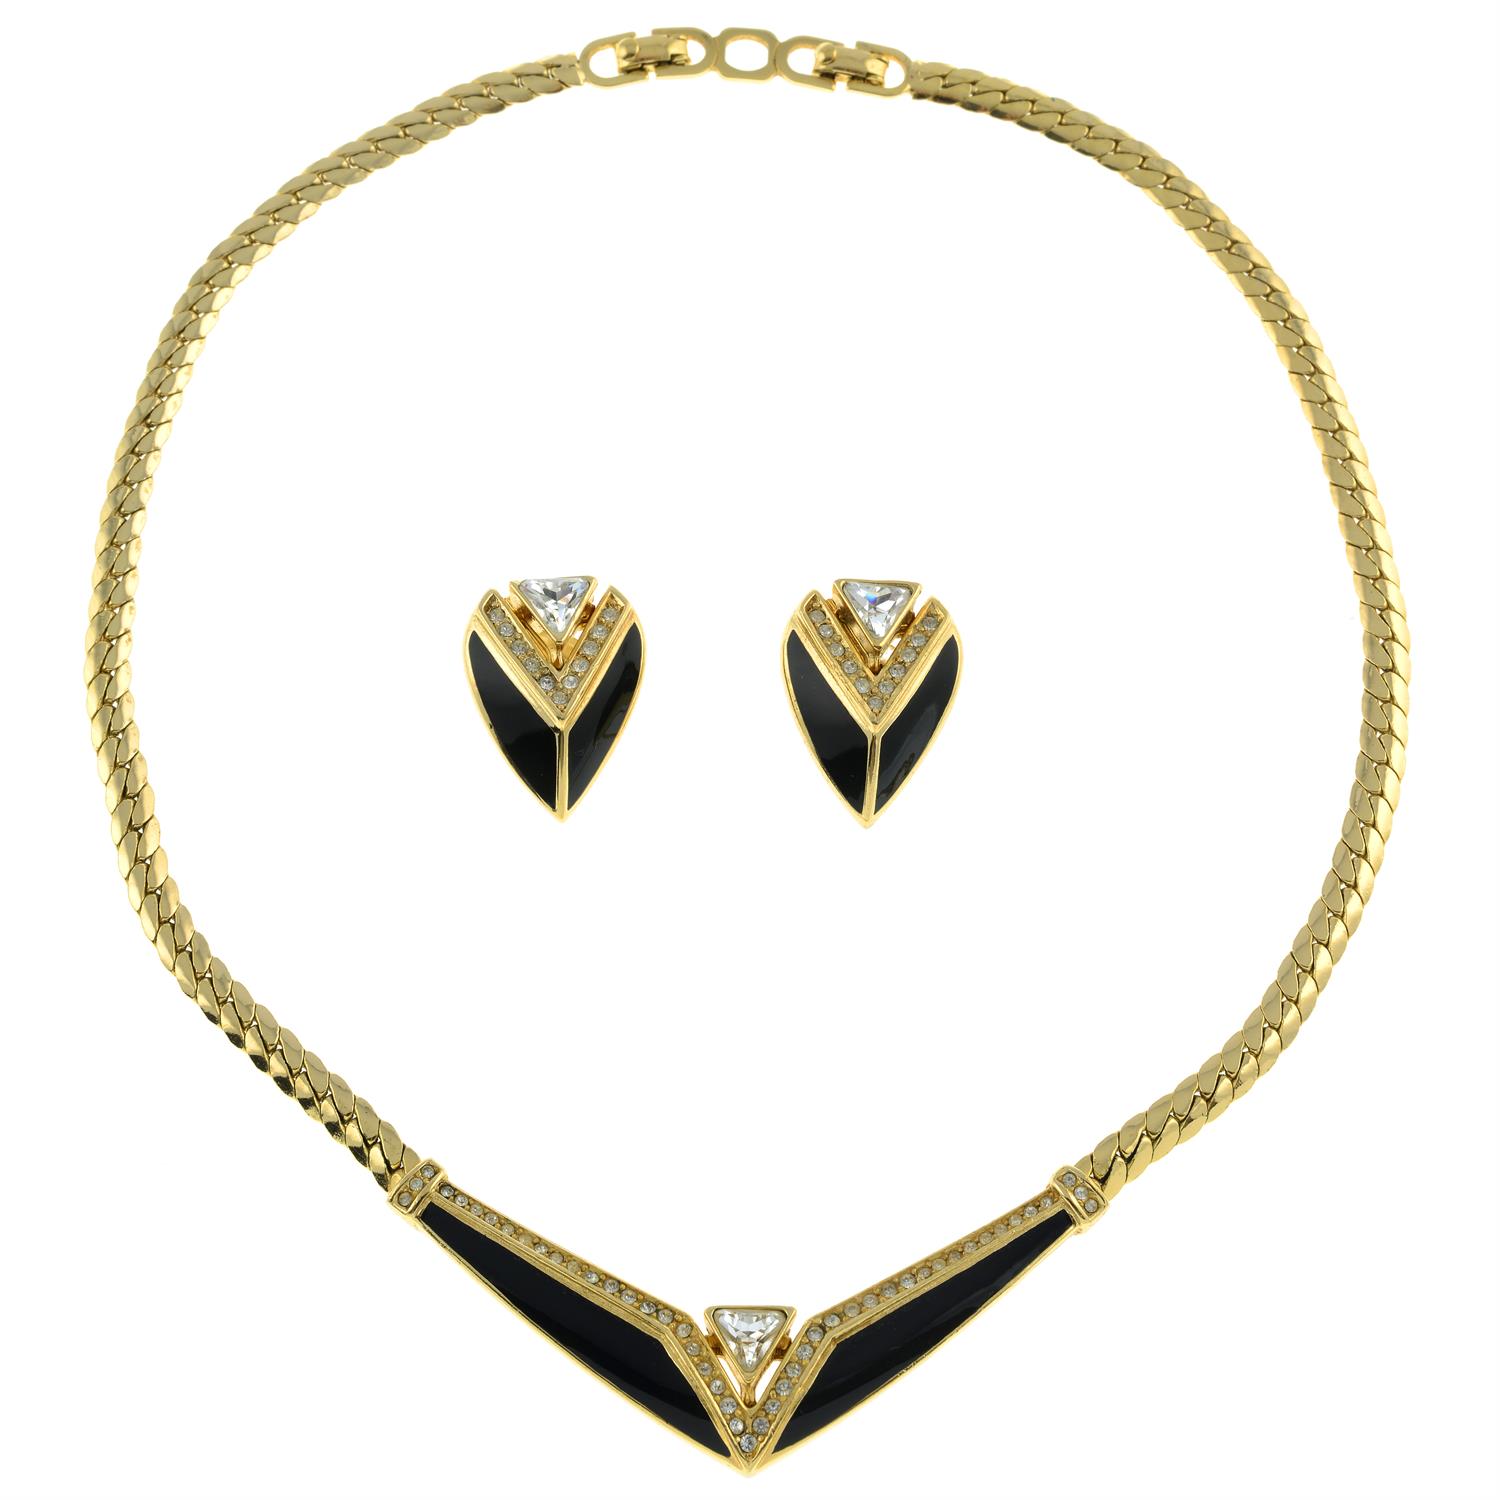 Christian Dior - necklace and clip on earring set.